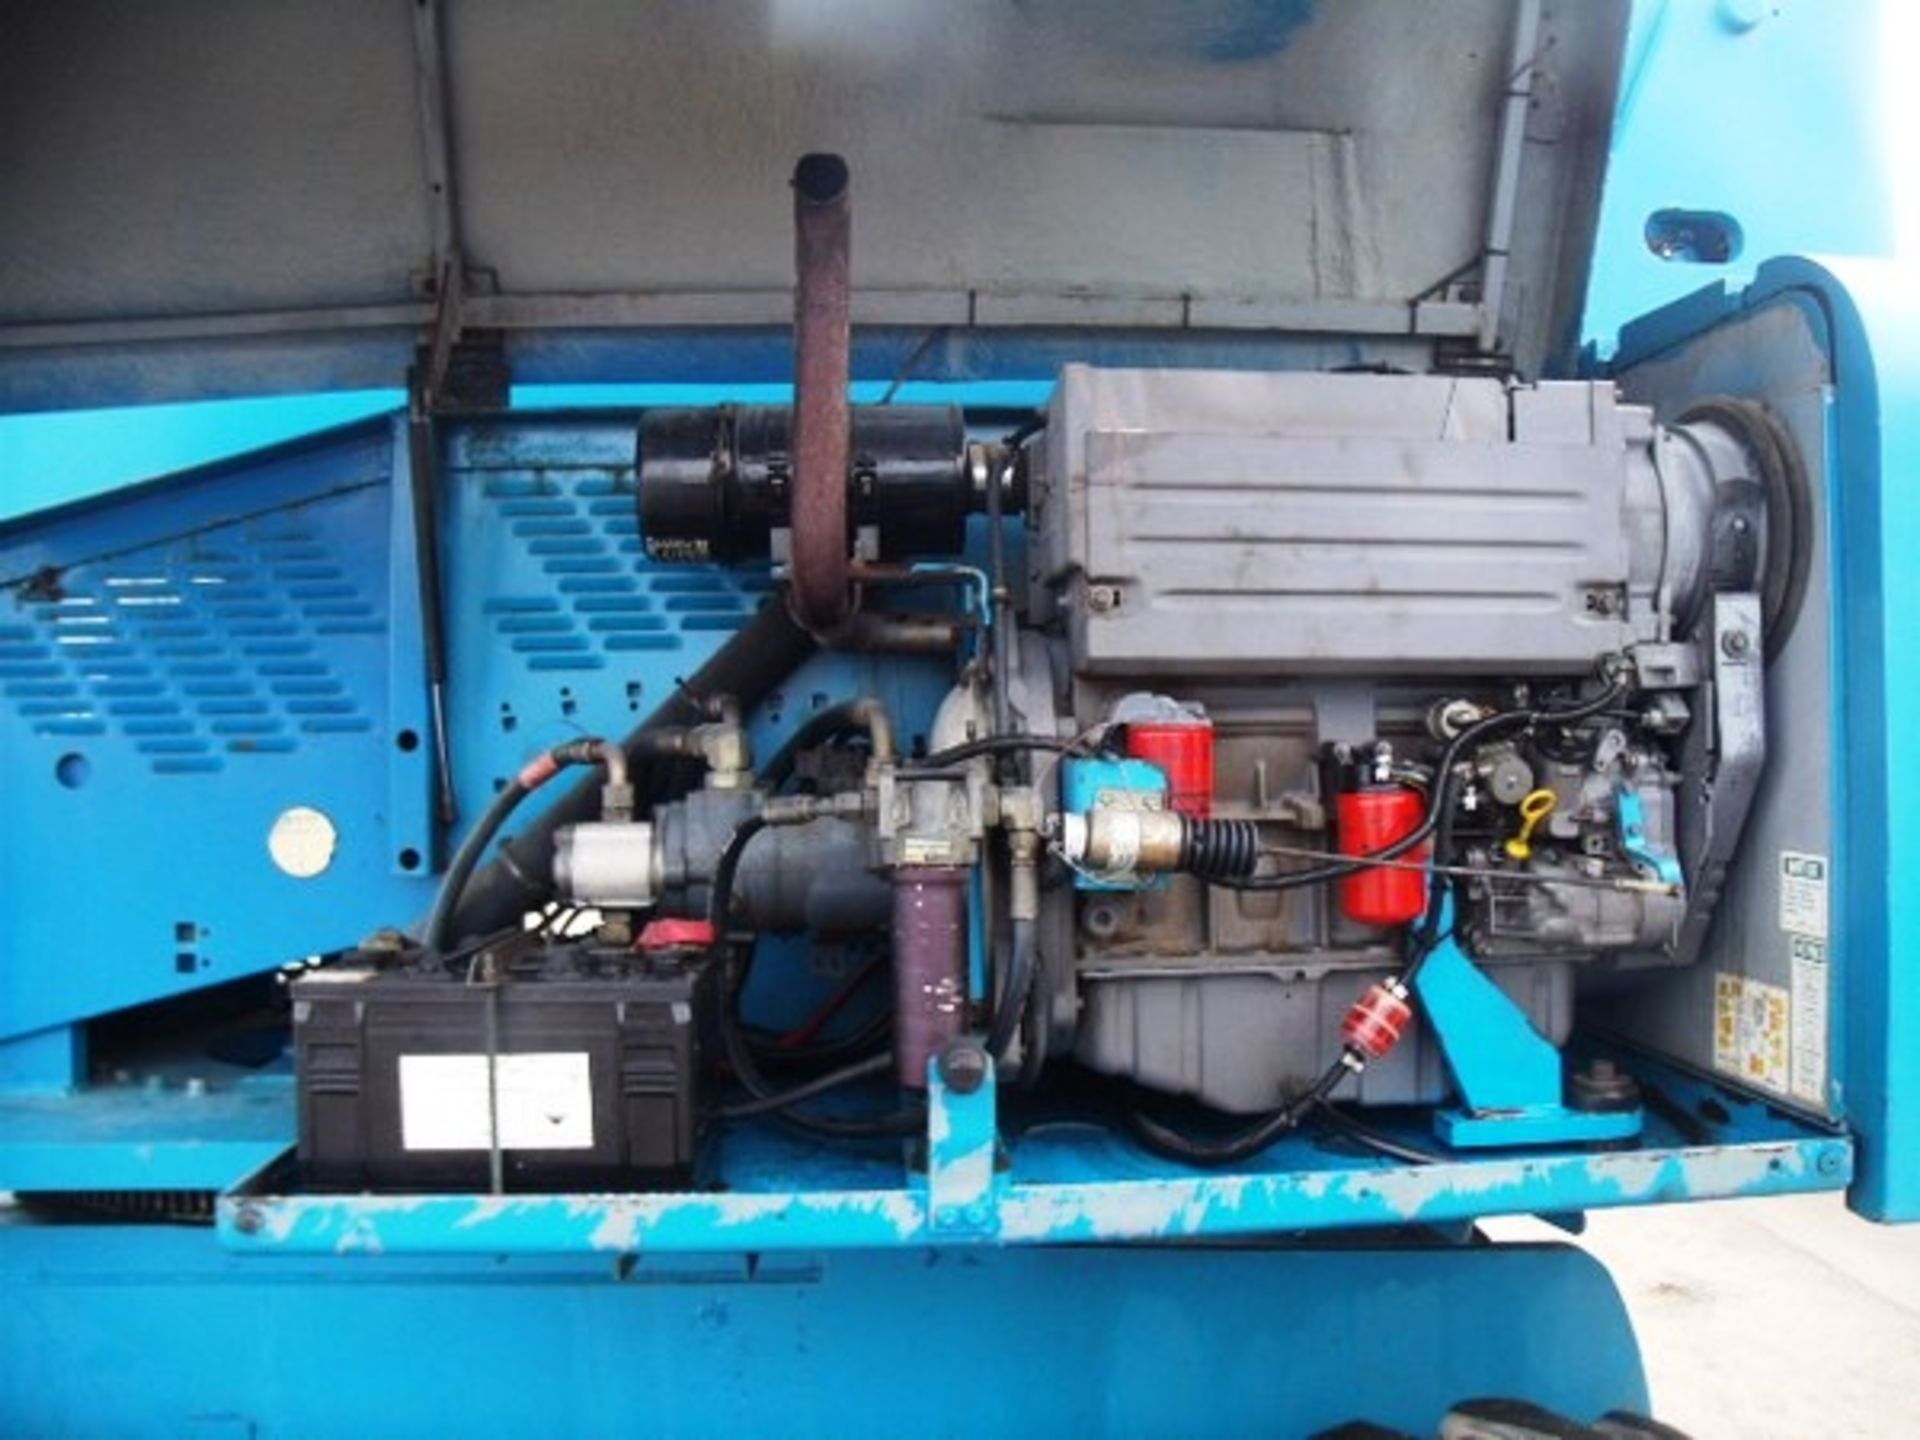 1999 GENIE 4X4 S85, s/n -1256, 5795hrs (verified), new alternator fitted 4 months ago, solid tyres. - Image 5 of 11